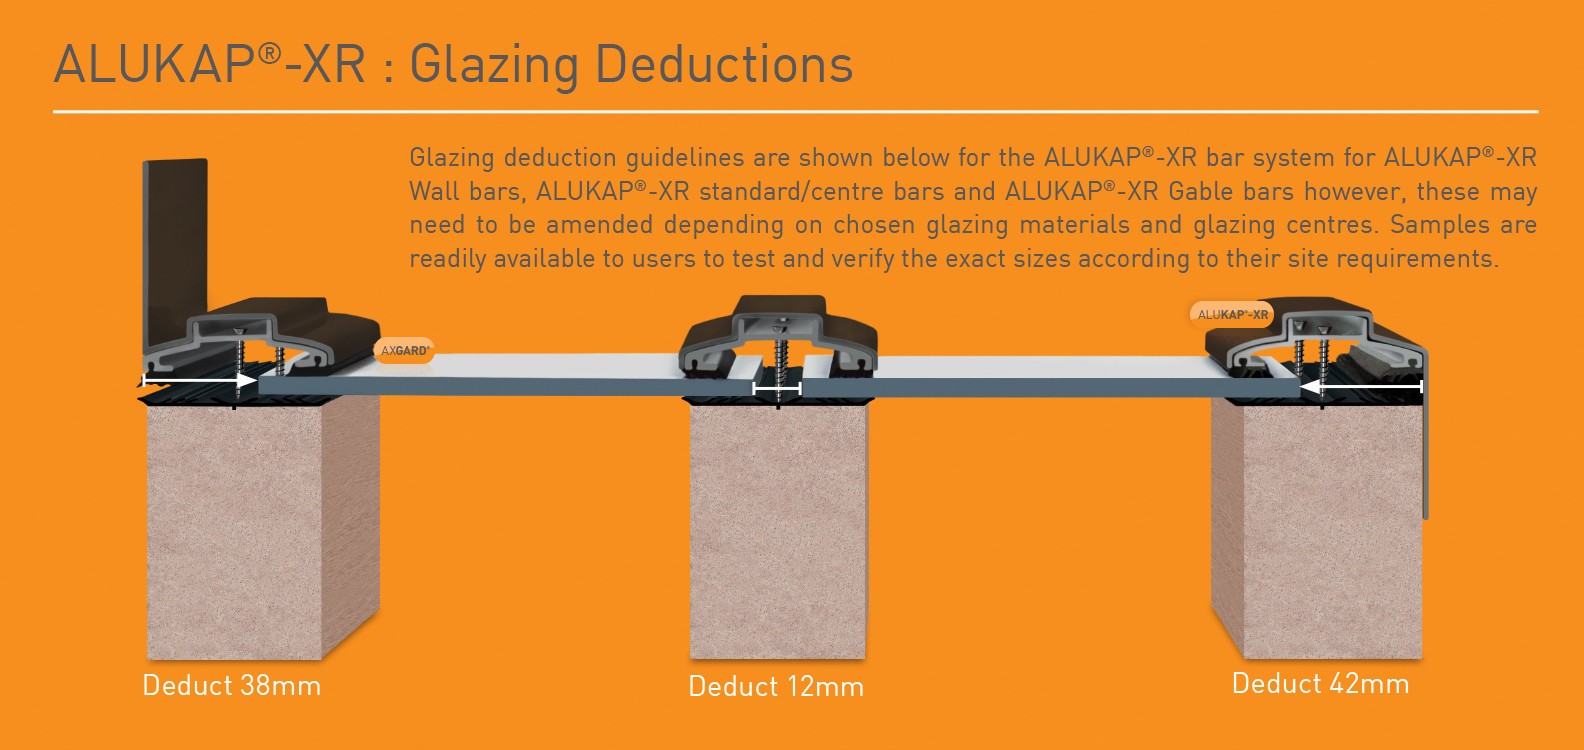 Deductions for Glazing